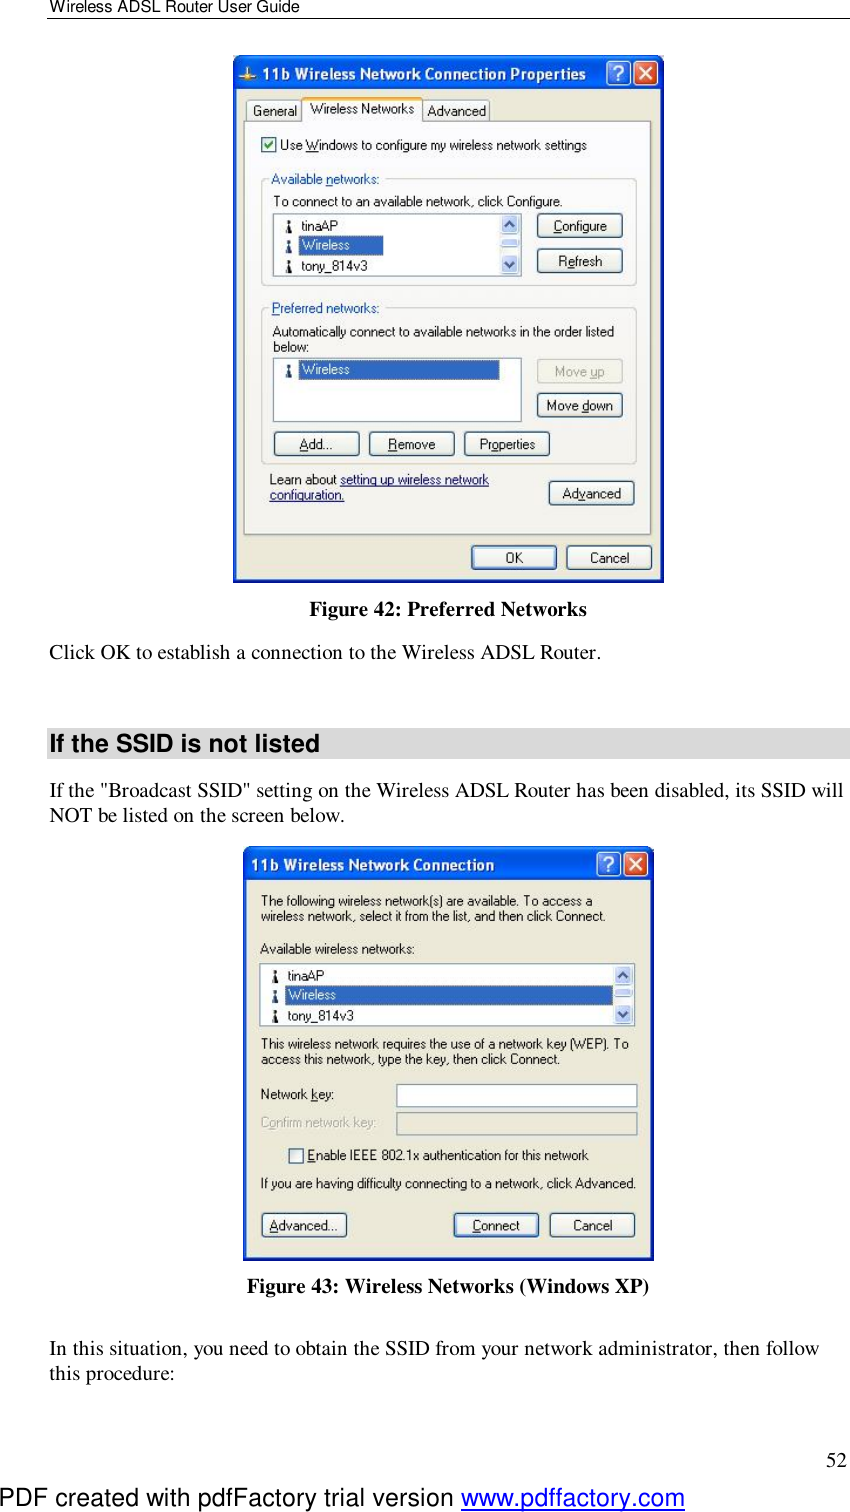 Wireless ADSL Router User Guide 52  Figure 42: Preferred Networks Click OK to establish a connection to the Wireless ADSL Router.  If the SSID is not listed If the &quot;Broadcast SSID&quot; setting on the Wireless ADSL Router has been disabled, its SSID will NOT be listed on the screen below.  Figure 43: Wireless Networks (Windows XP) In this situation, you need to obtain the SSID from your network administrator, then follow this procedure: PDF created with pdfFactory trial version www.pdffactory.com